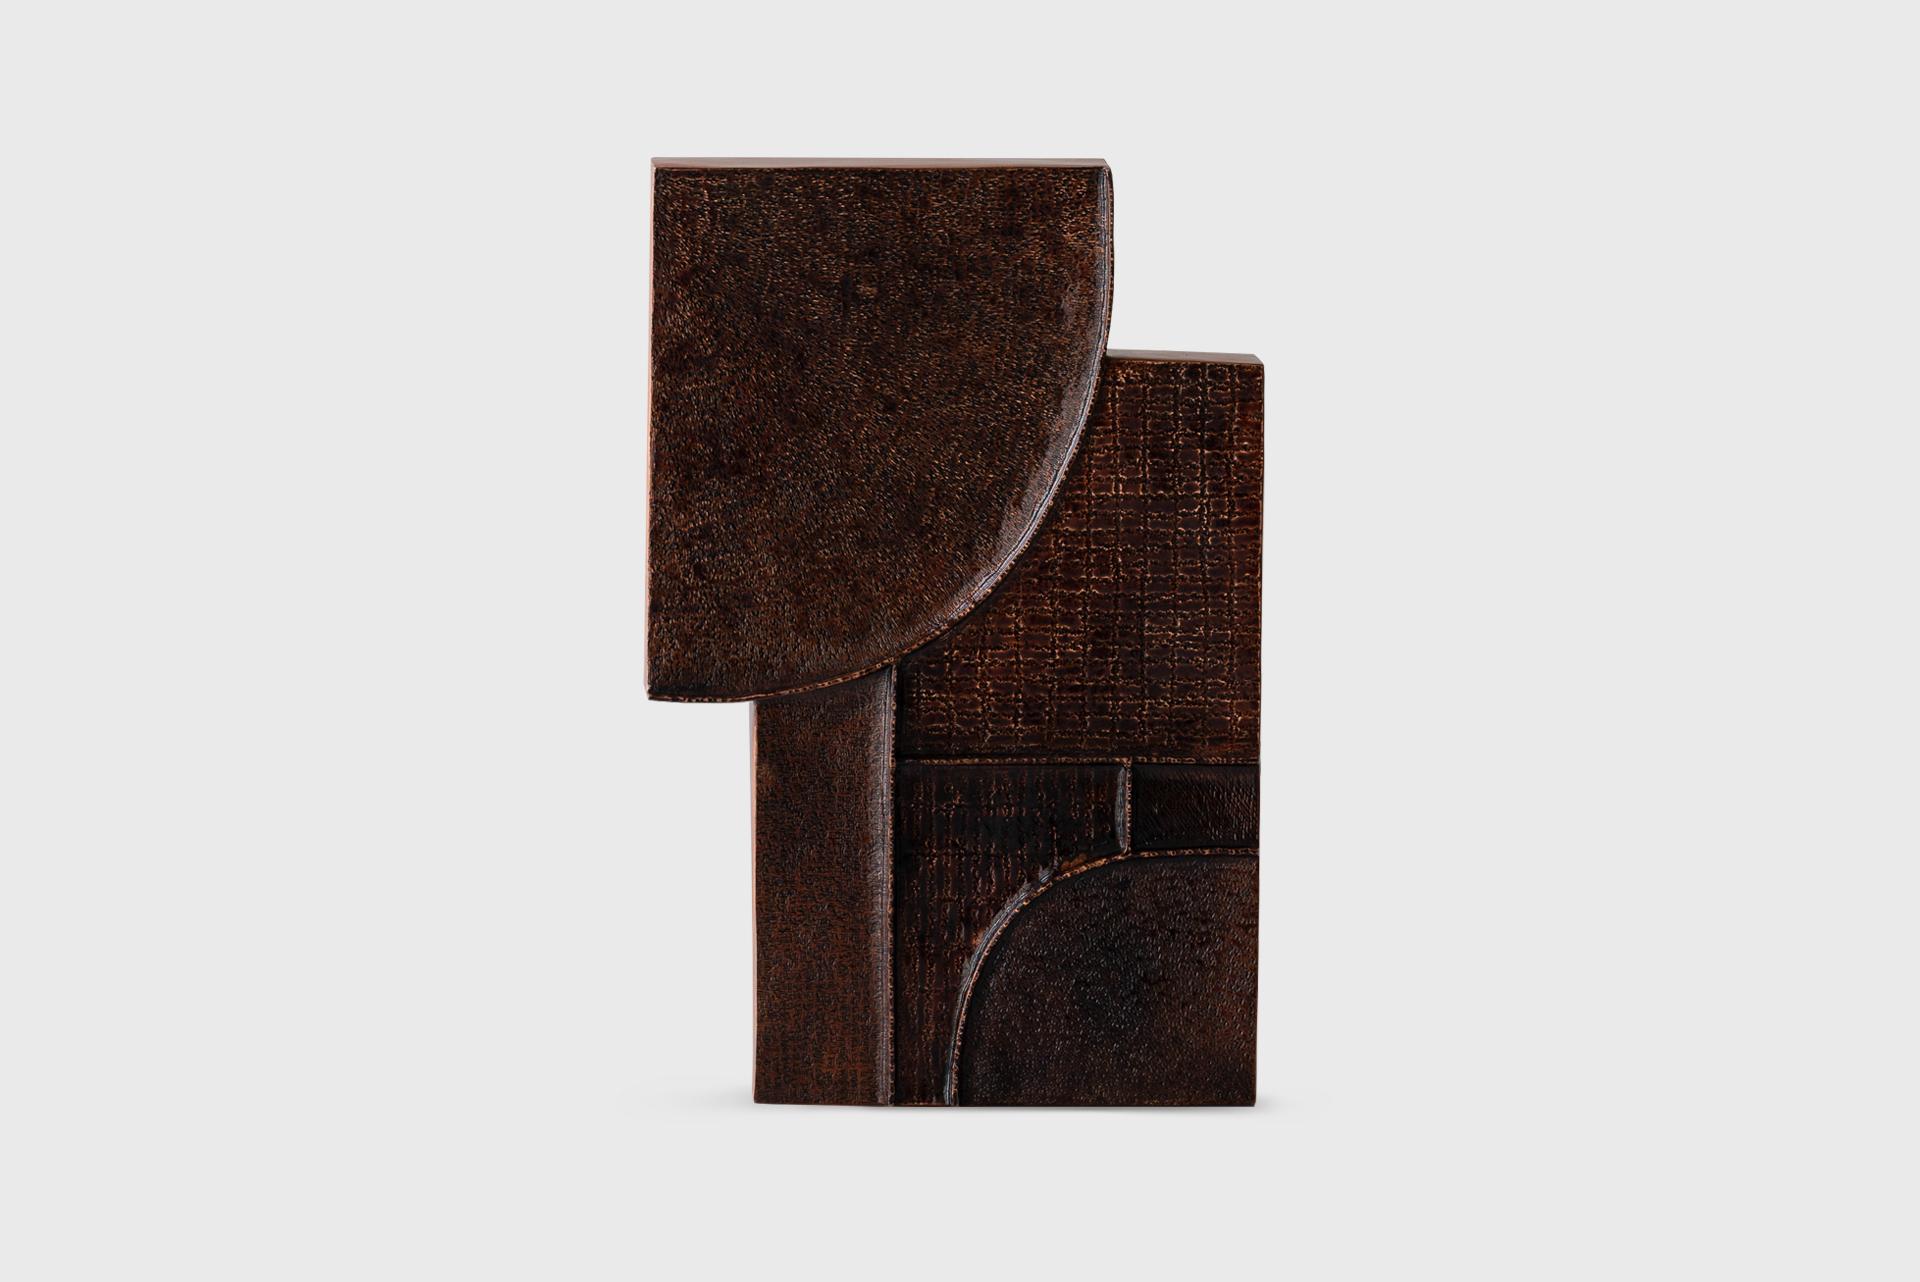 Contemporary Wall Object 2, Textured Natural Dark Lacquer, Seung Hyun Lee, Korea For Sale 1